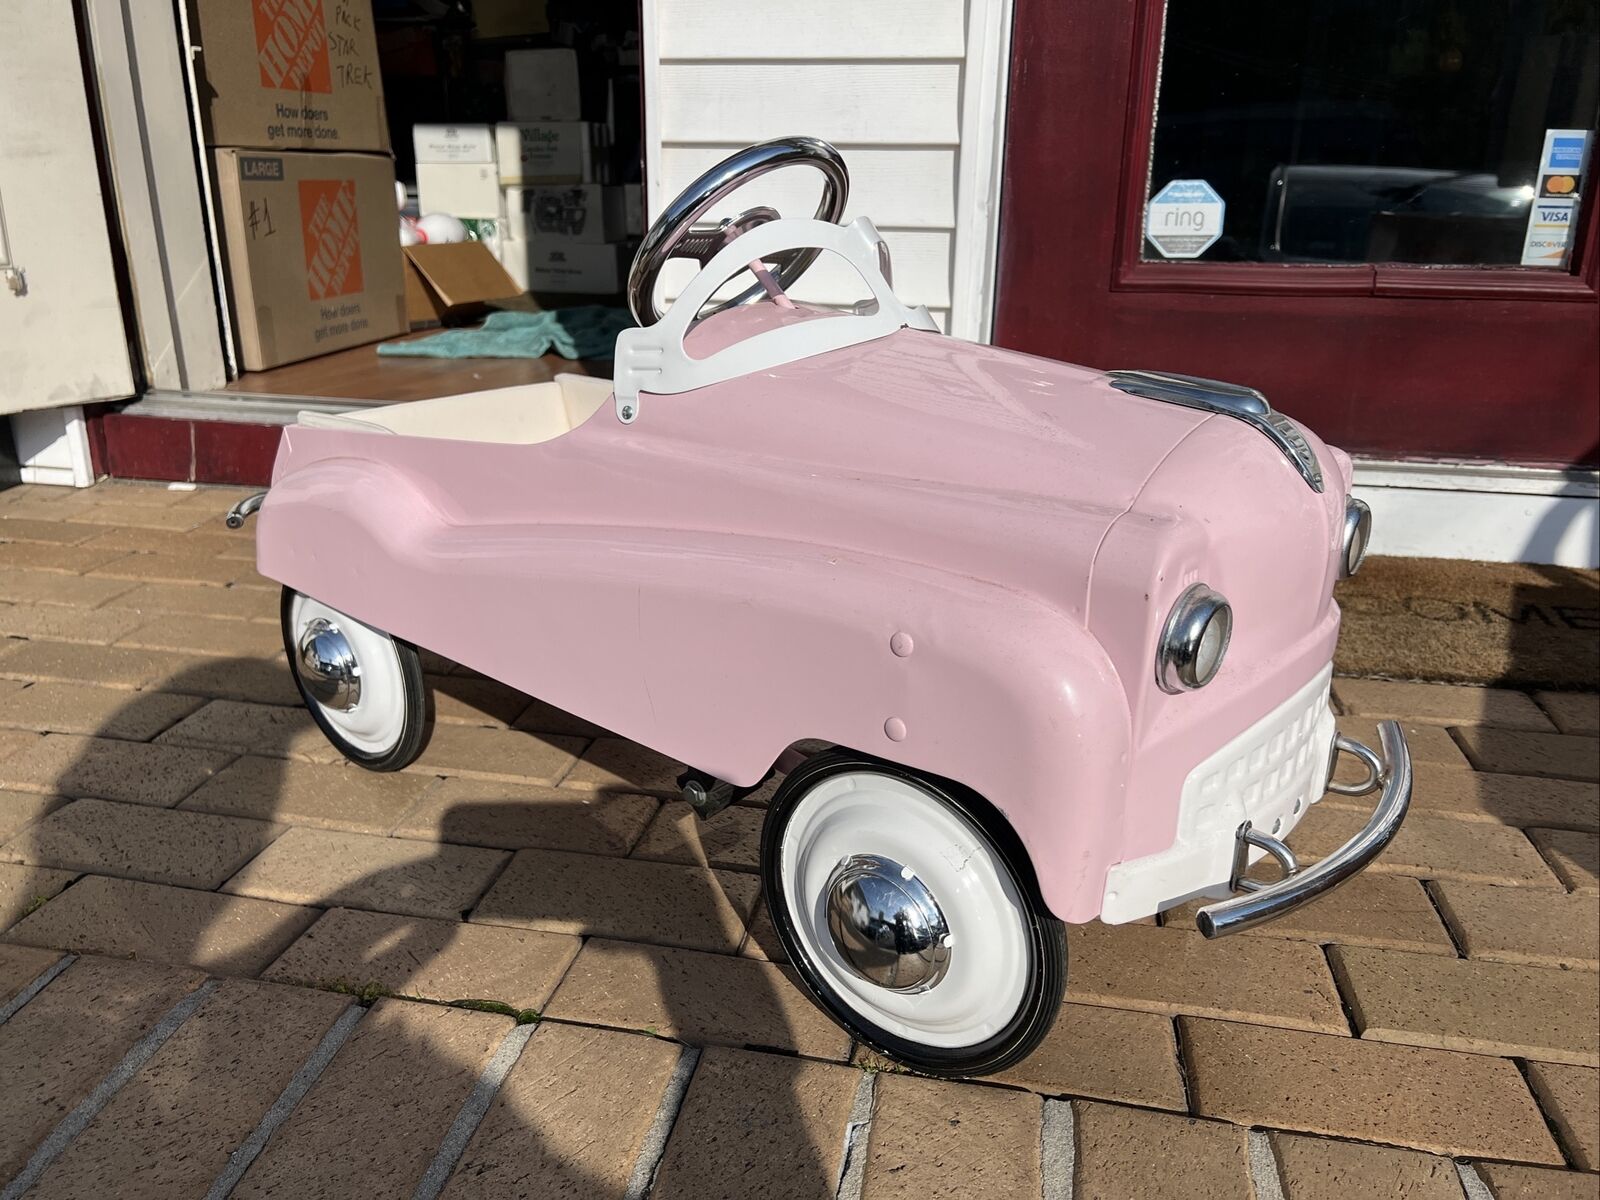 Pink Pedal Car Toy Car Ride On Car Vintage Heavy Metal Classic Used